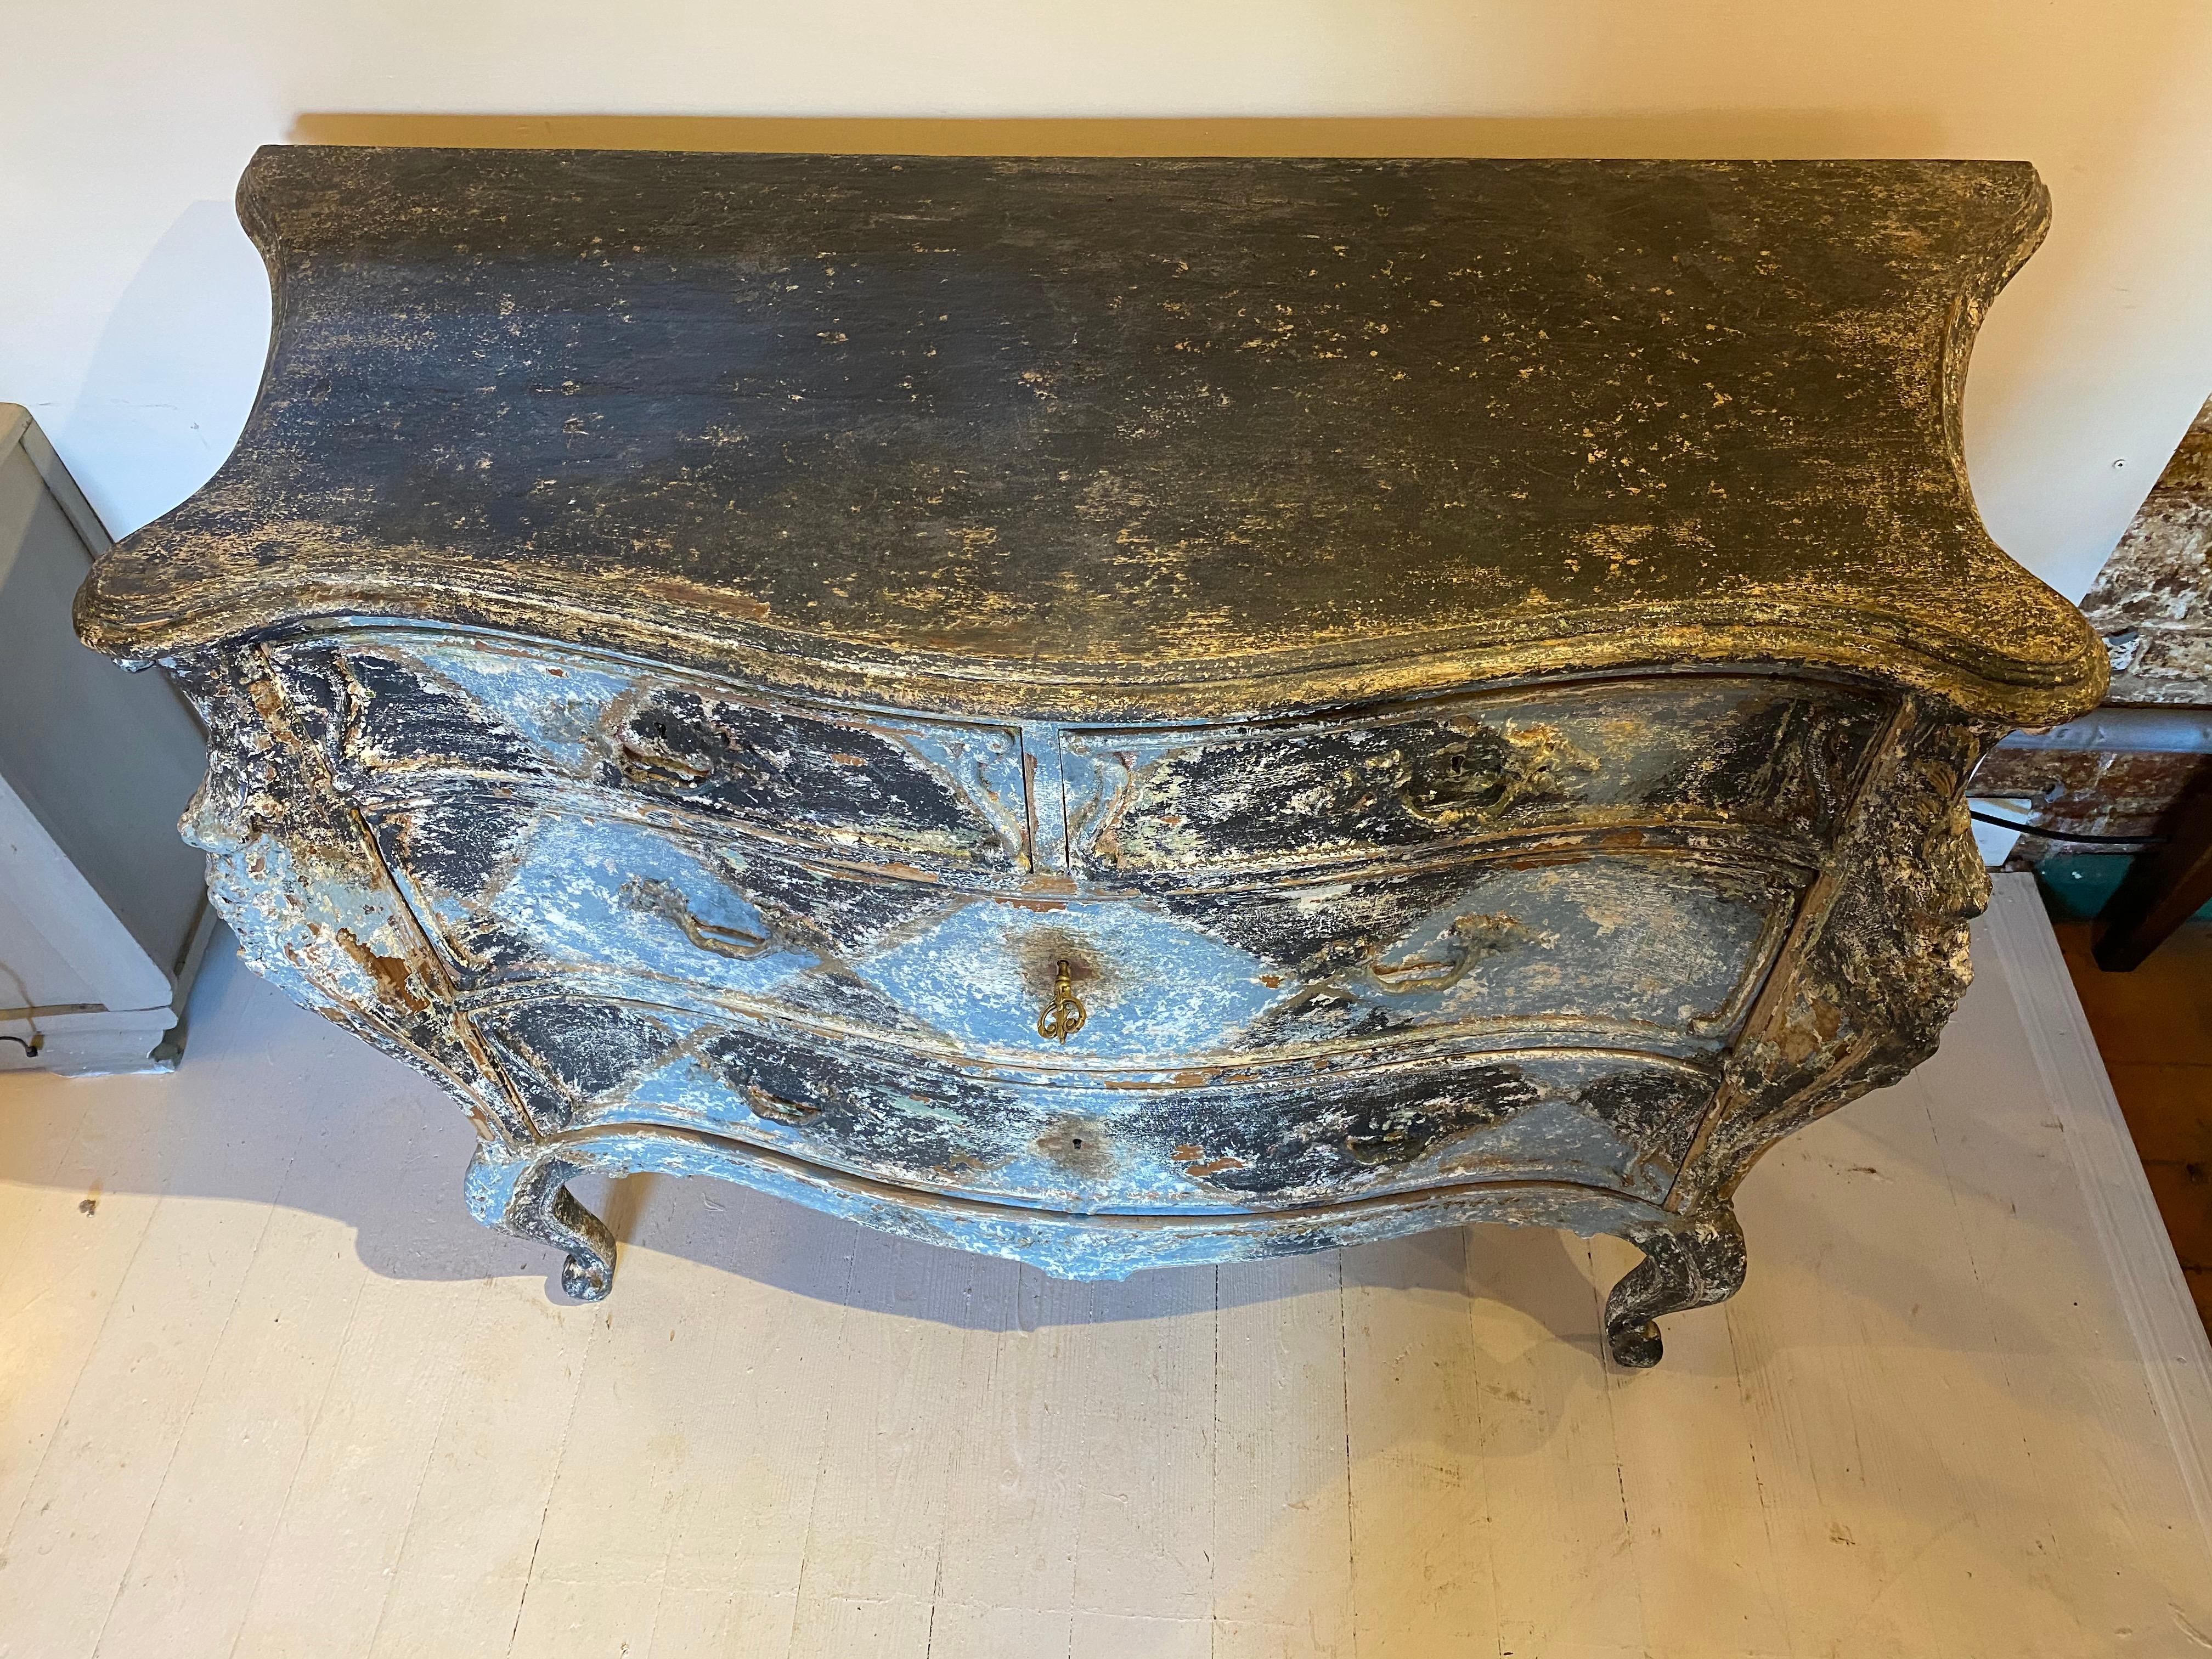 A beautiful 19th century style Venetian commode chest with later painted decoration.